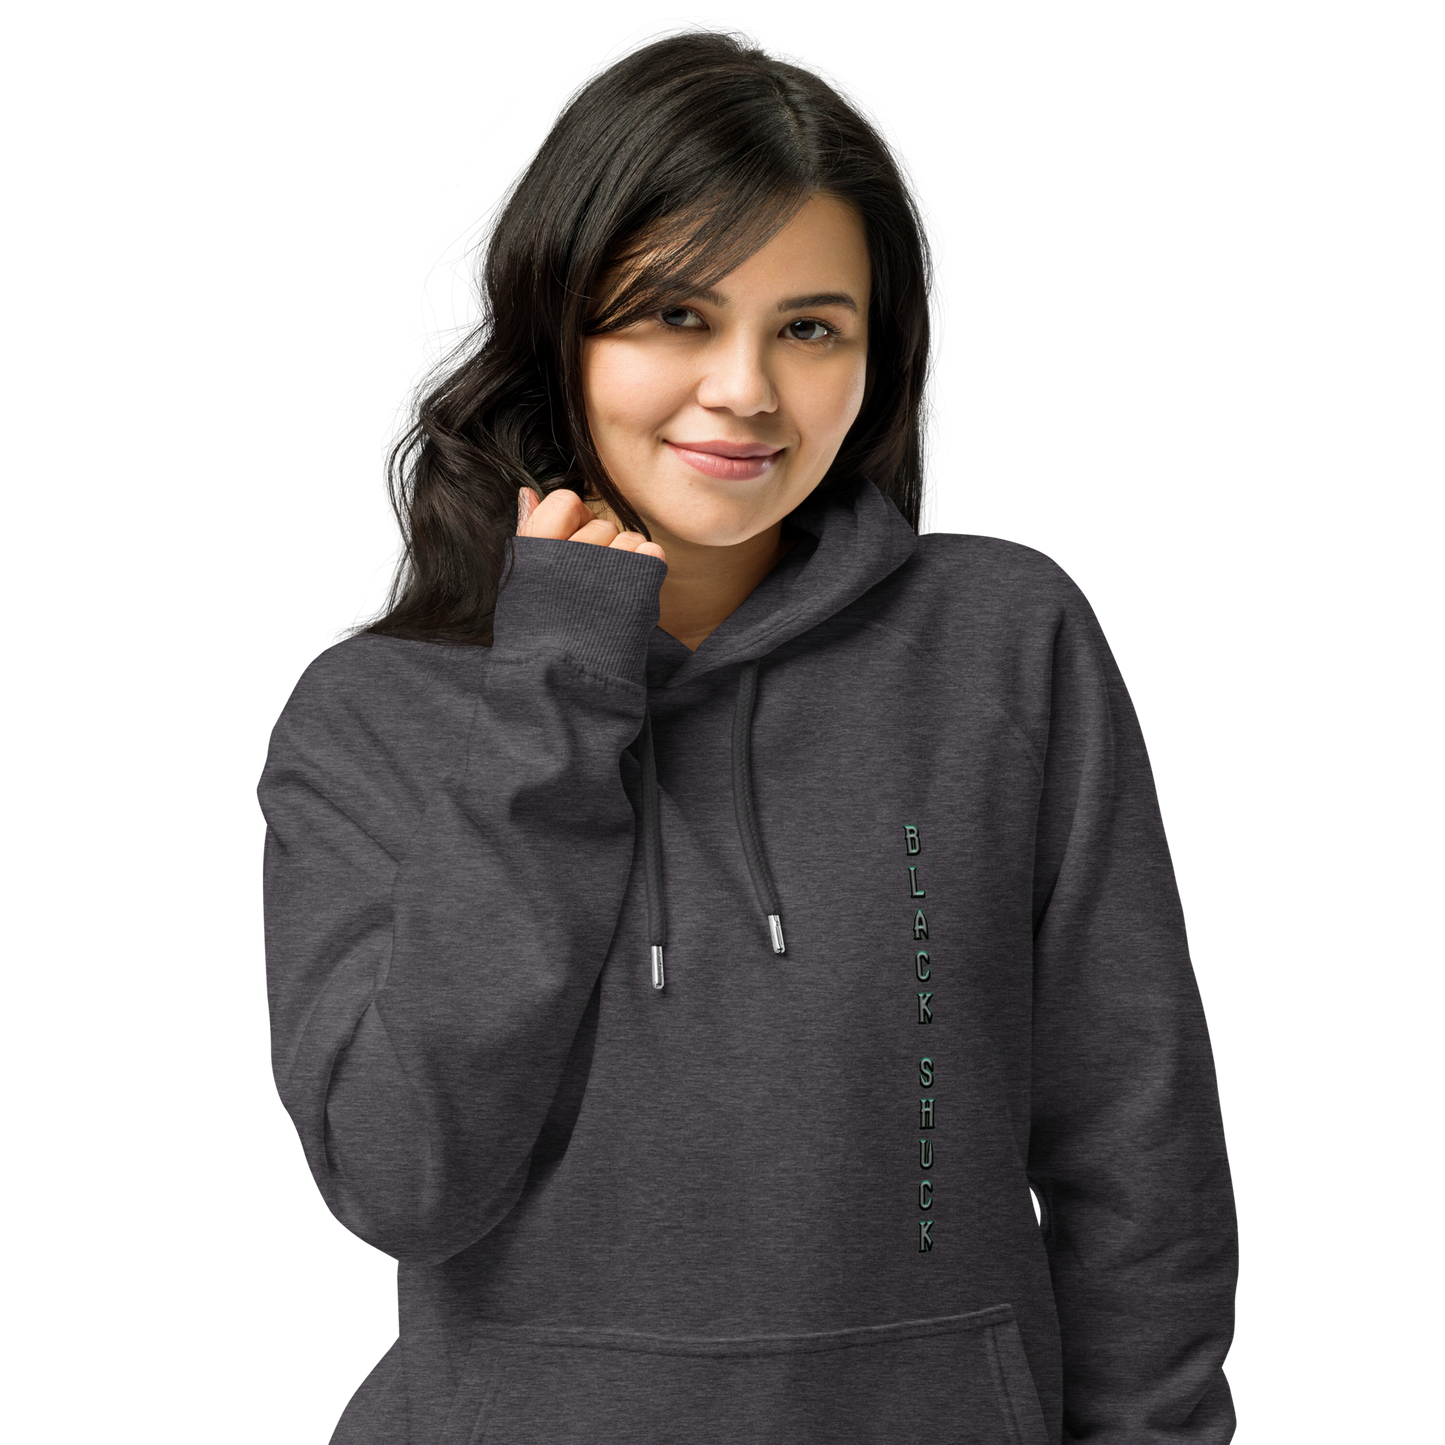 Official Black Shuck Pullover Hoodie